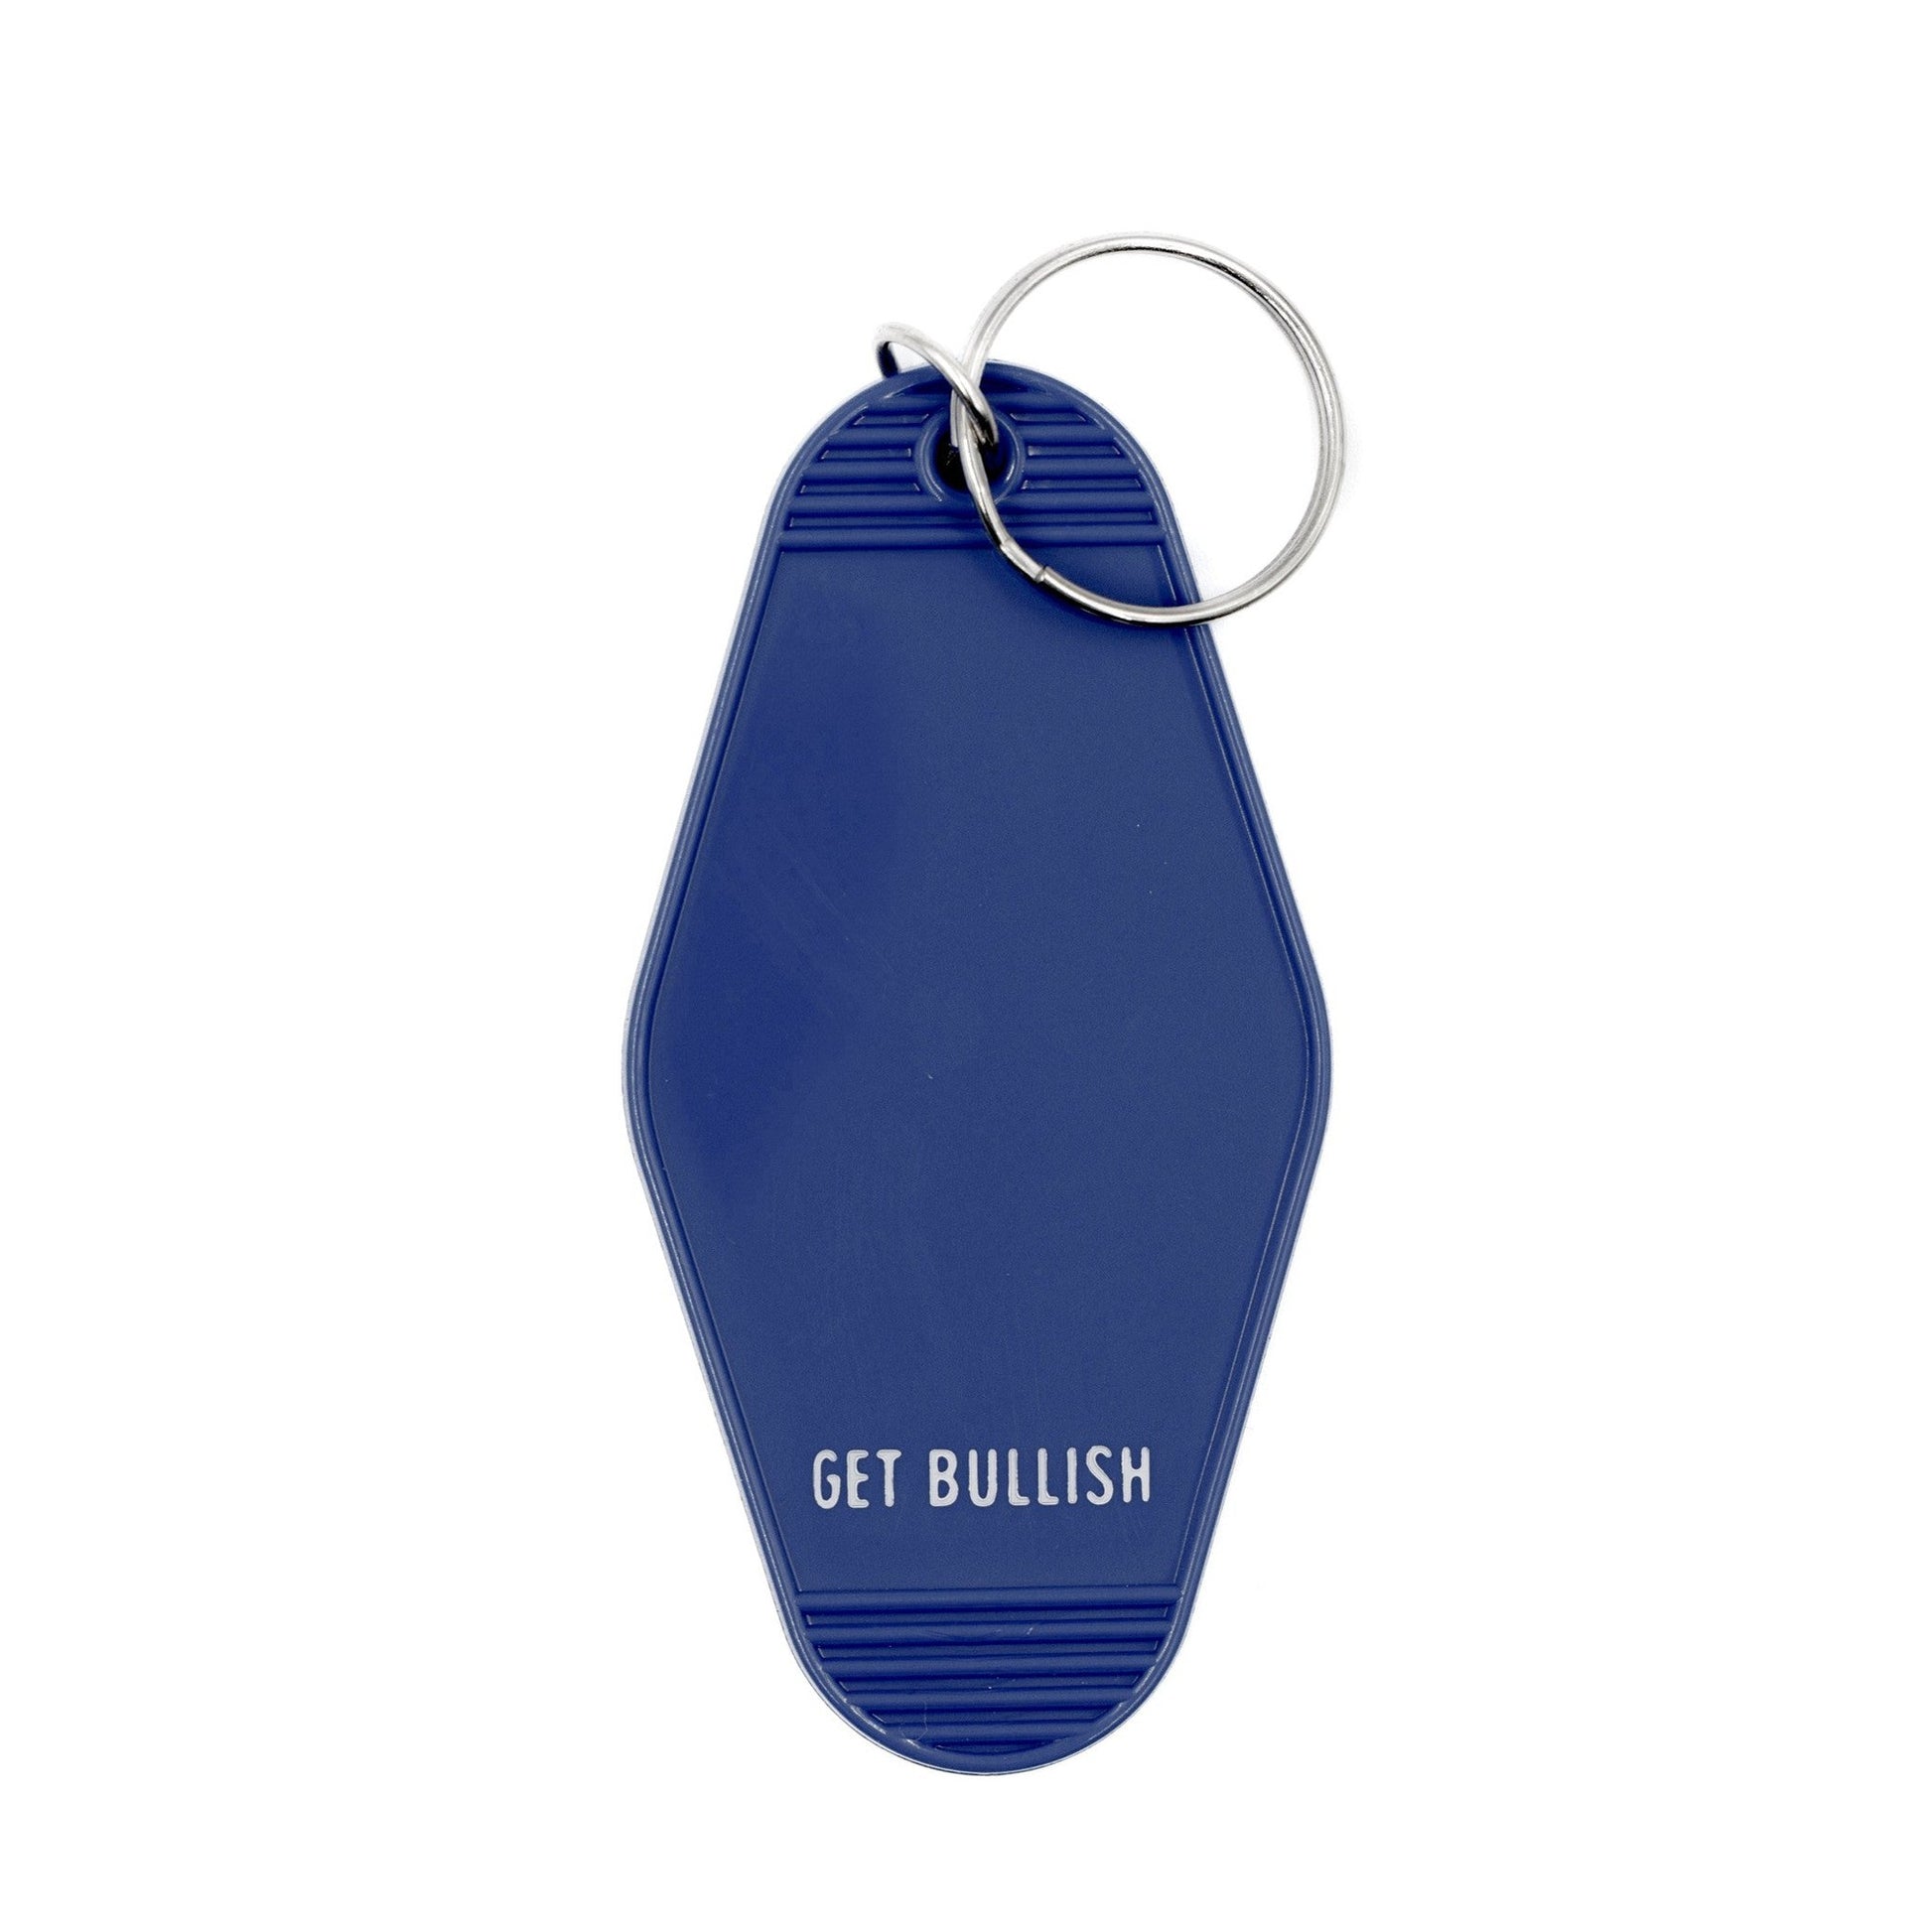 A Dad Bod is a Rad Bod Motel Style Keychain in Blue | Body Positivity Themed Funny Key Tag | Gift for Him